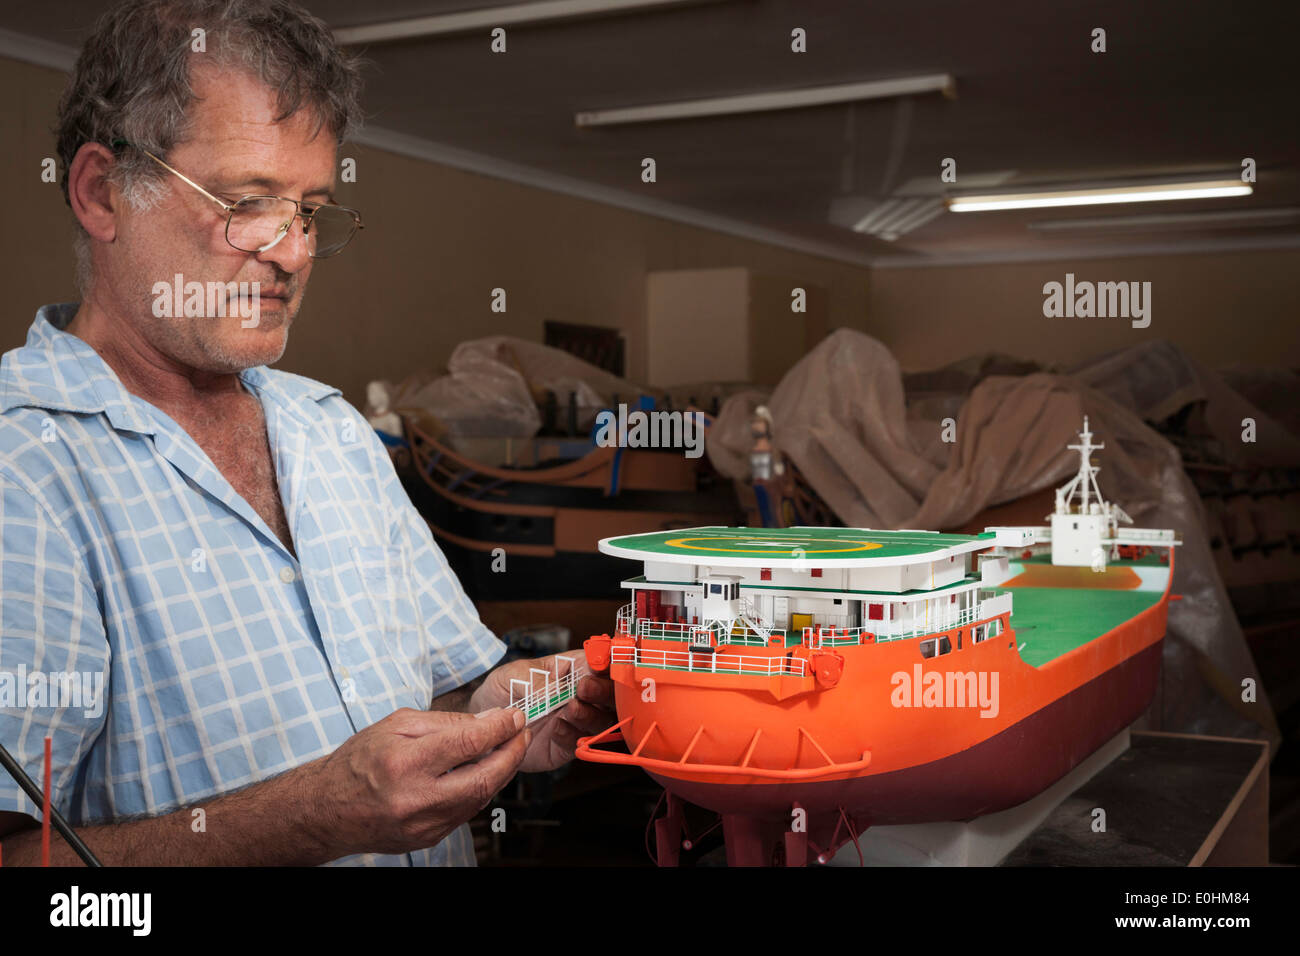 Man holds a miniature railing that will decorate the handcrafted model of the DeBeers Diamond Mining ship Stock Photo